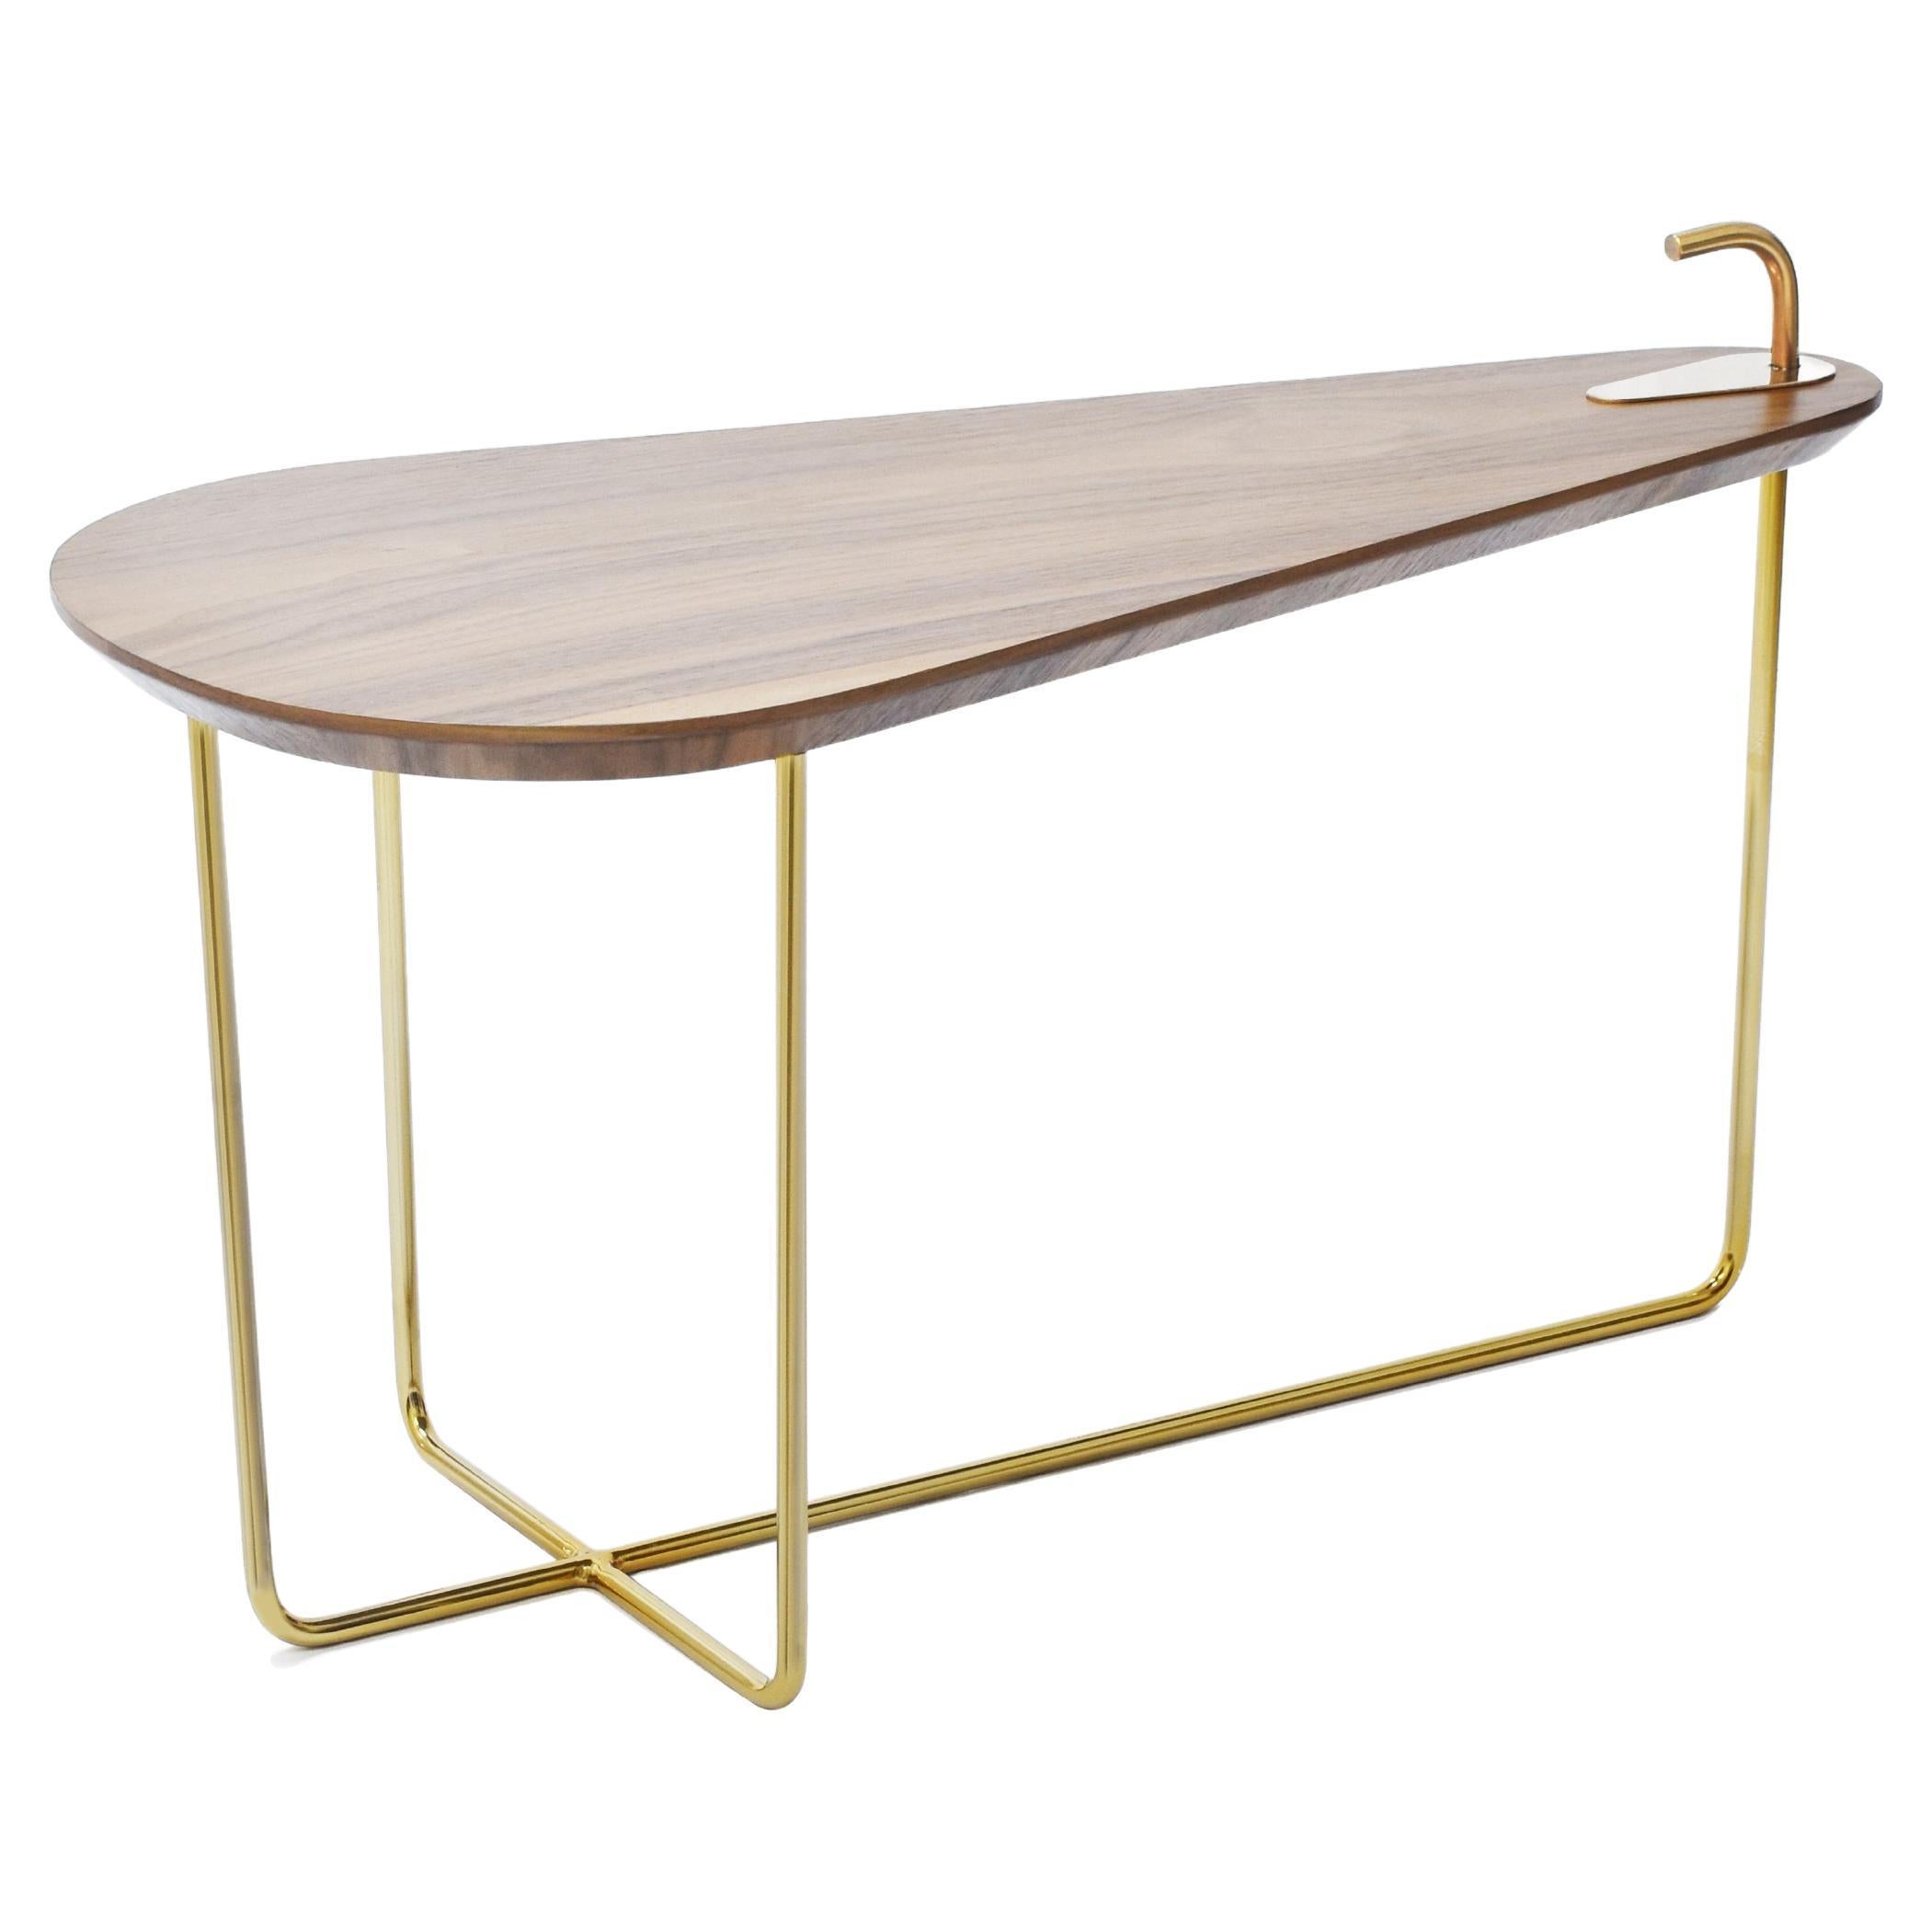 "Leaf" Center Table in Golden Carbon Steel and Top in Natural Walnut Wood Veneer For Sale